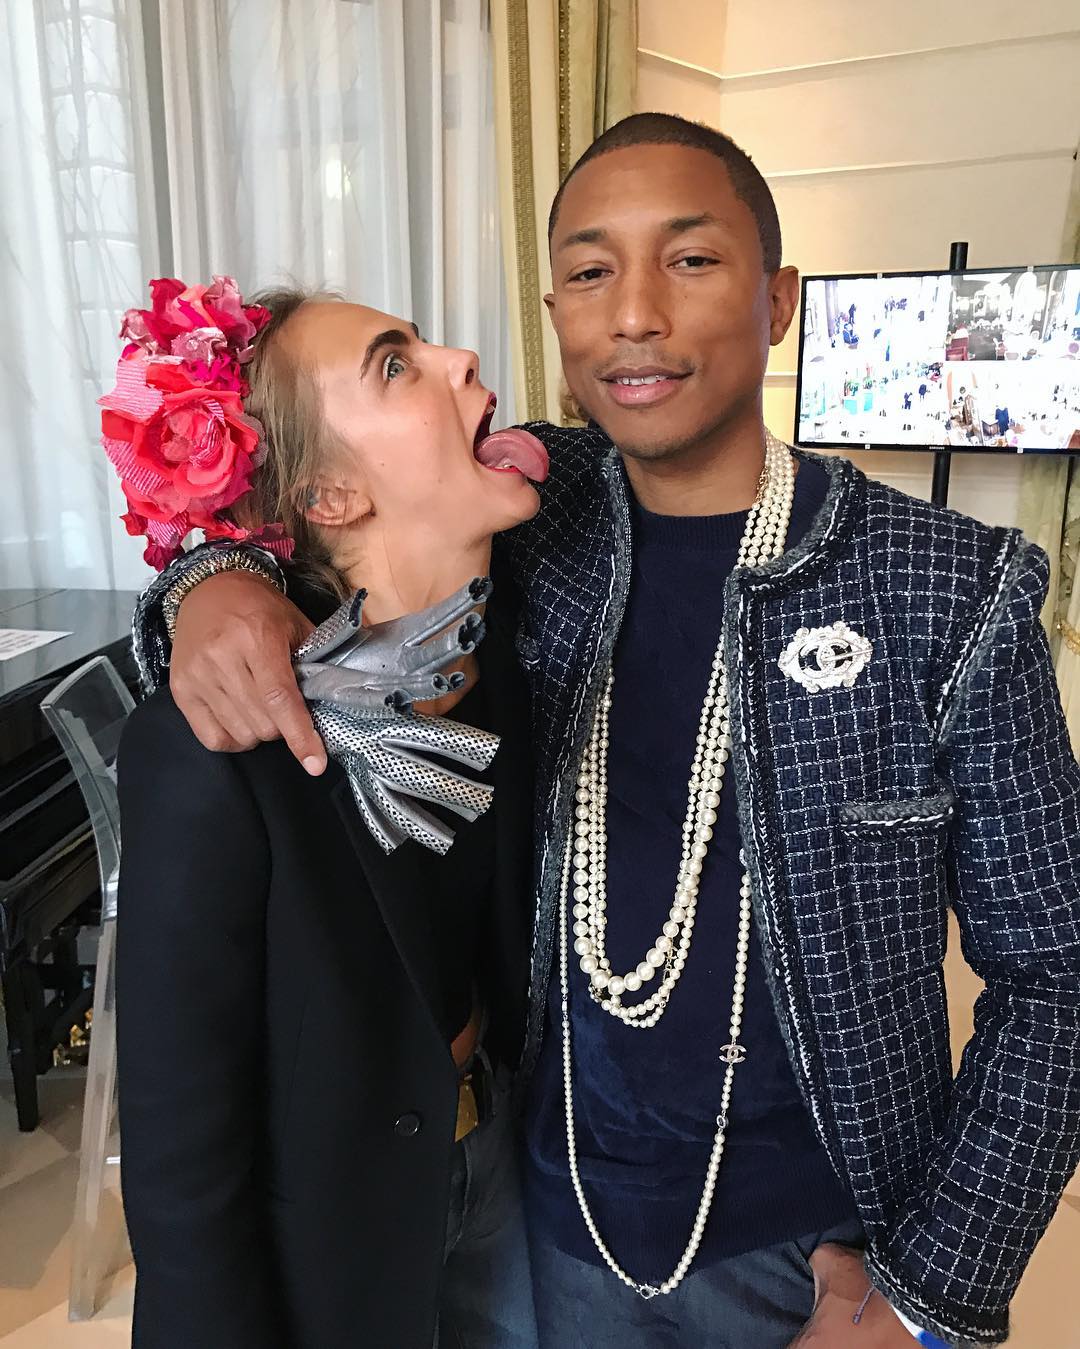 SPOTTED: Pharrell Williams In Chanel For Métiers d’Art Paris Show